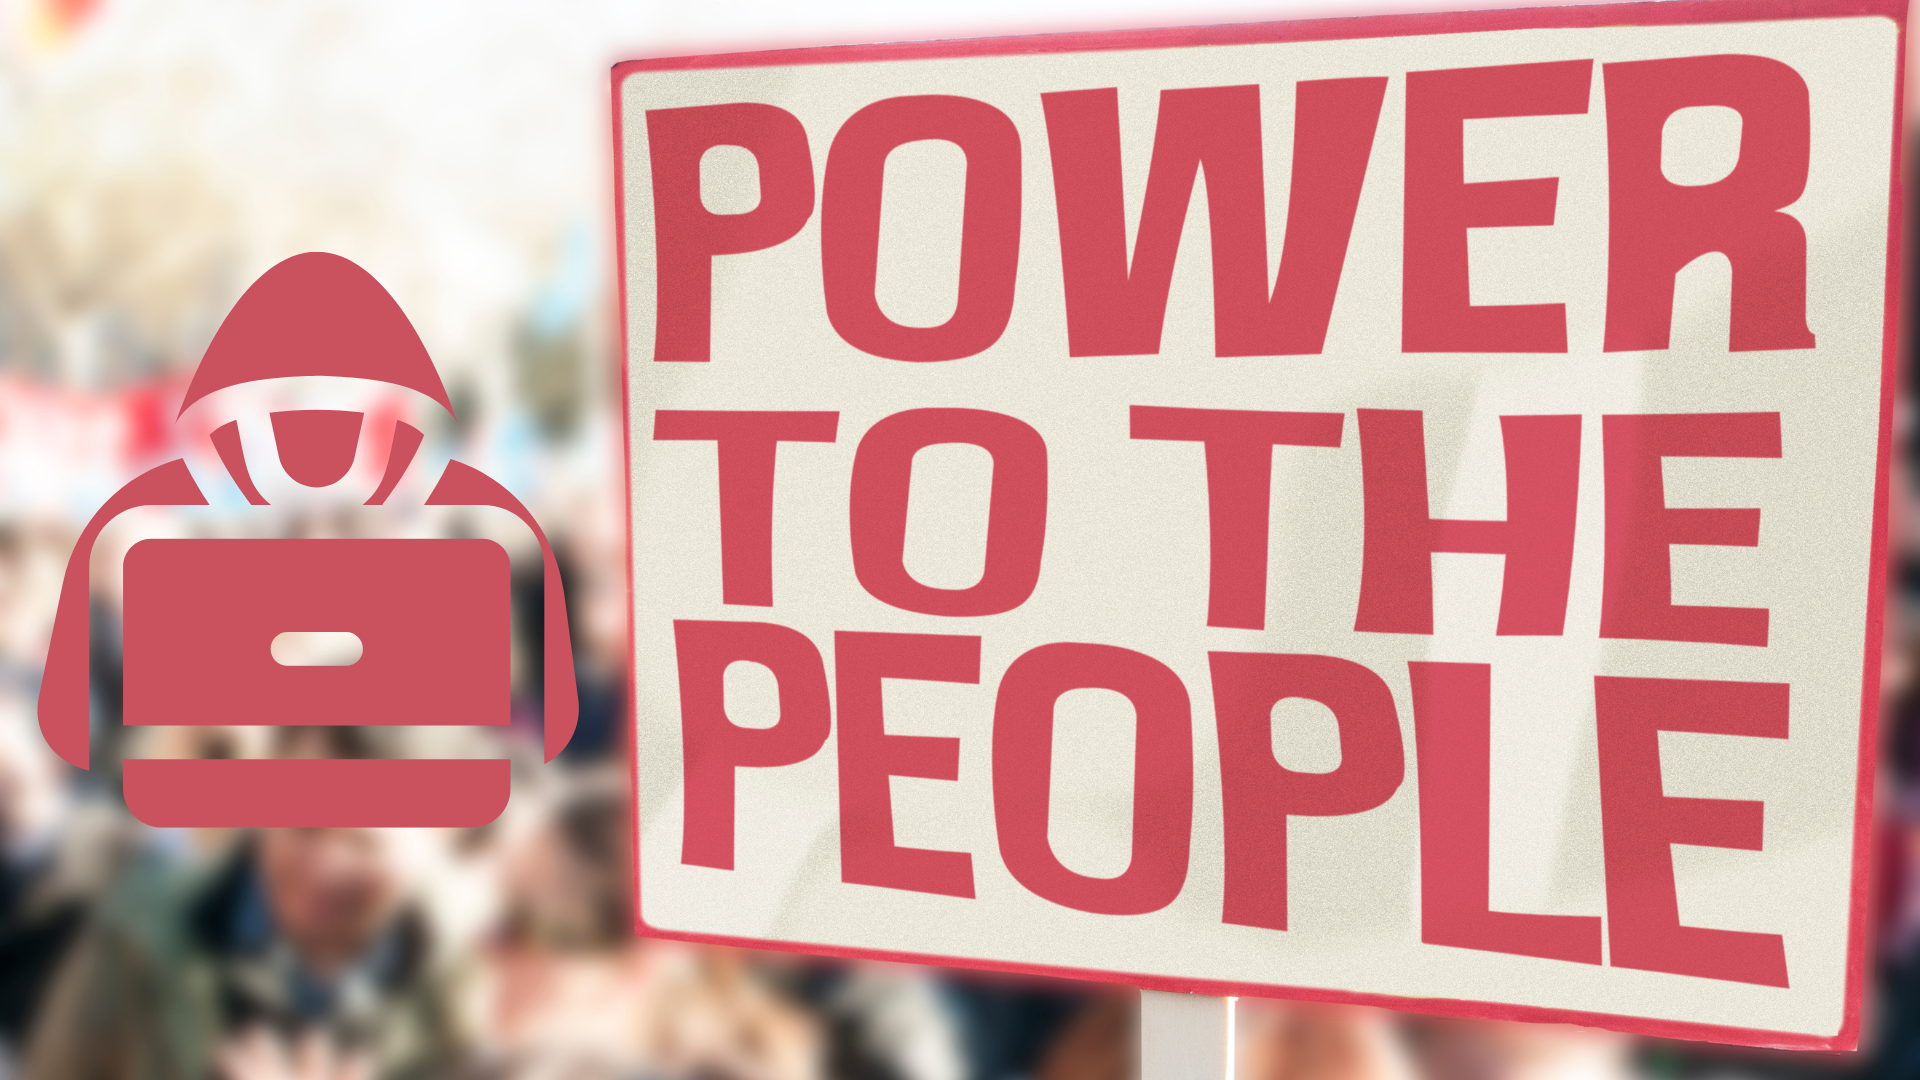 Power to the People Sign in front of an out-of-focus crowd next to a cybersecurity icon